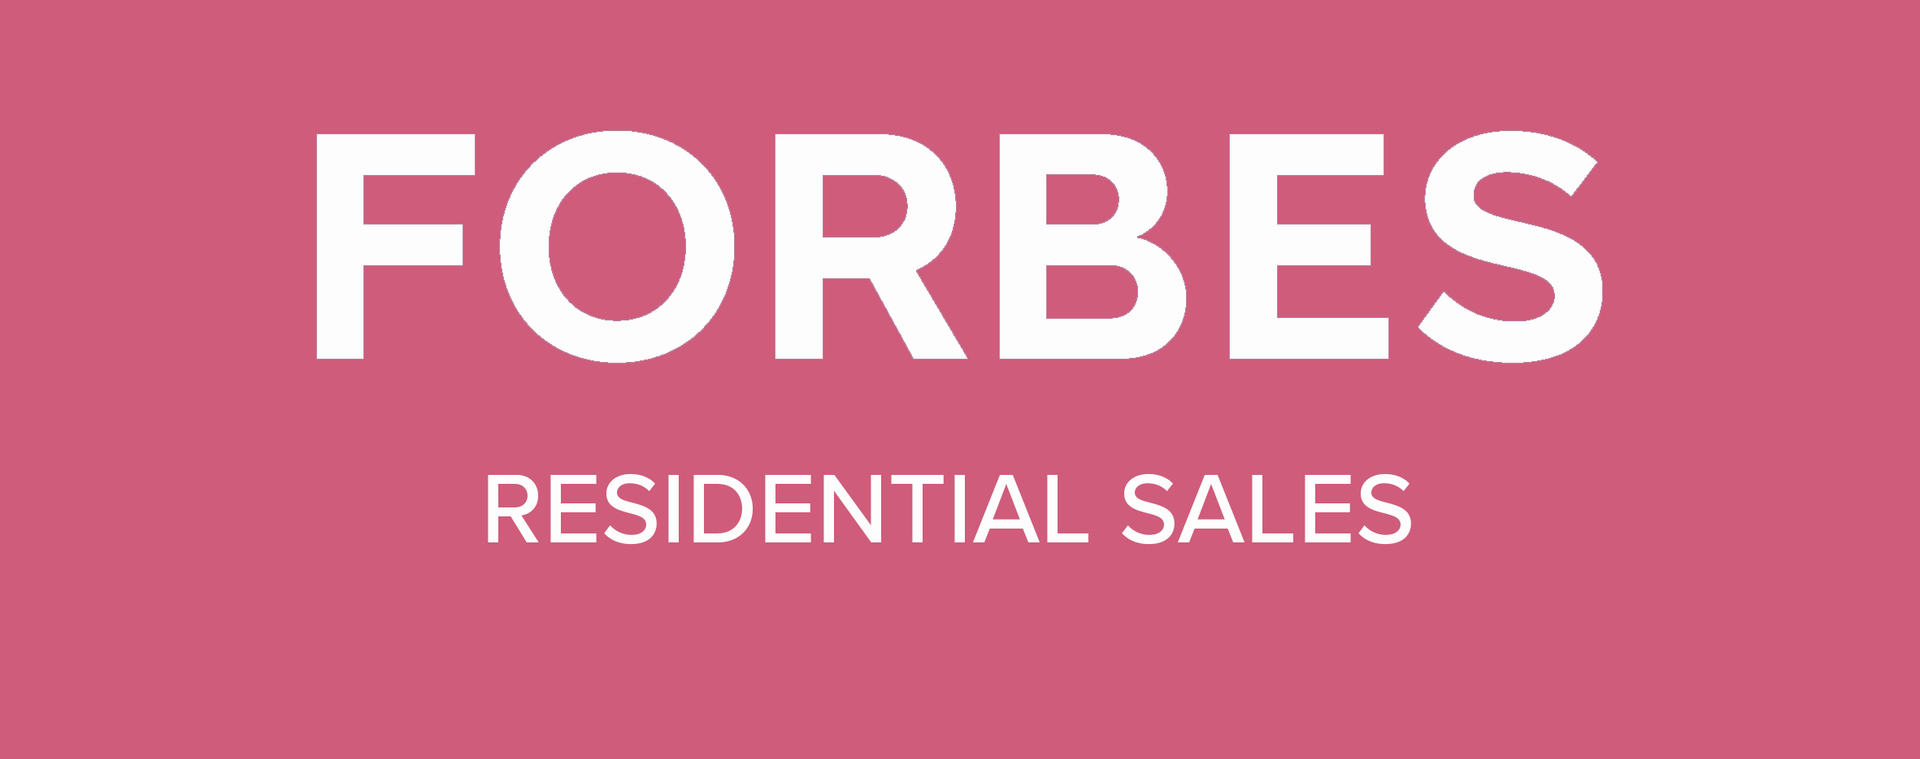 Forbes Residential Sales